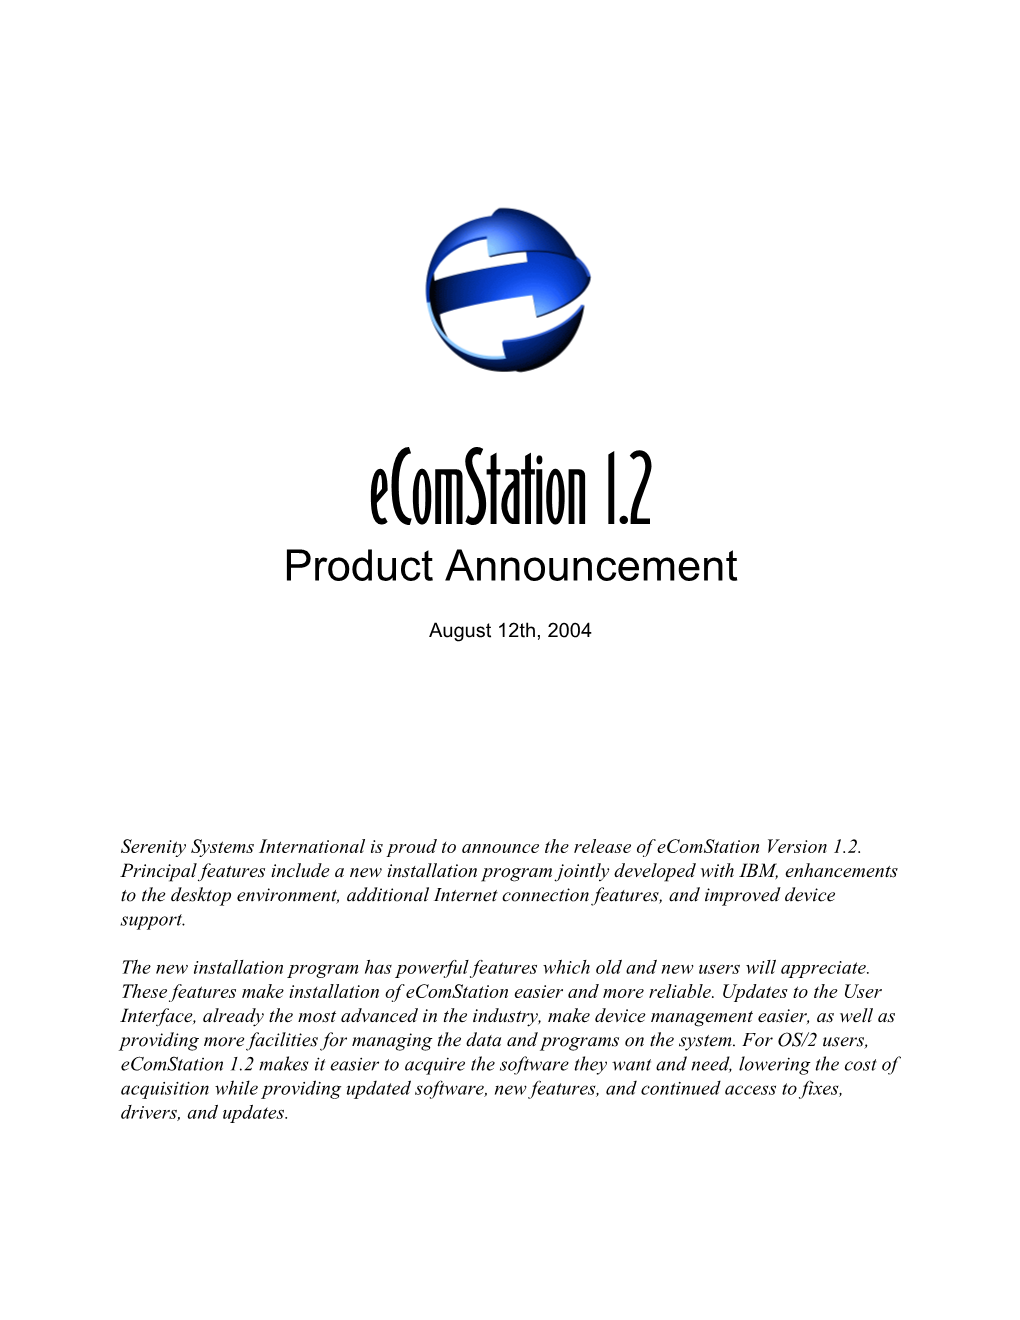 Ecomstation 1.2 Product Announcement